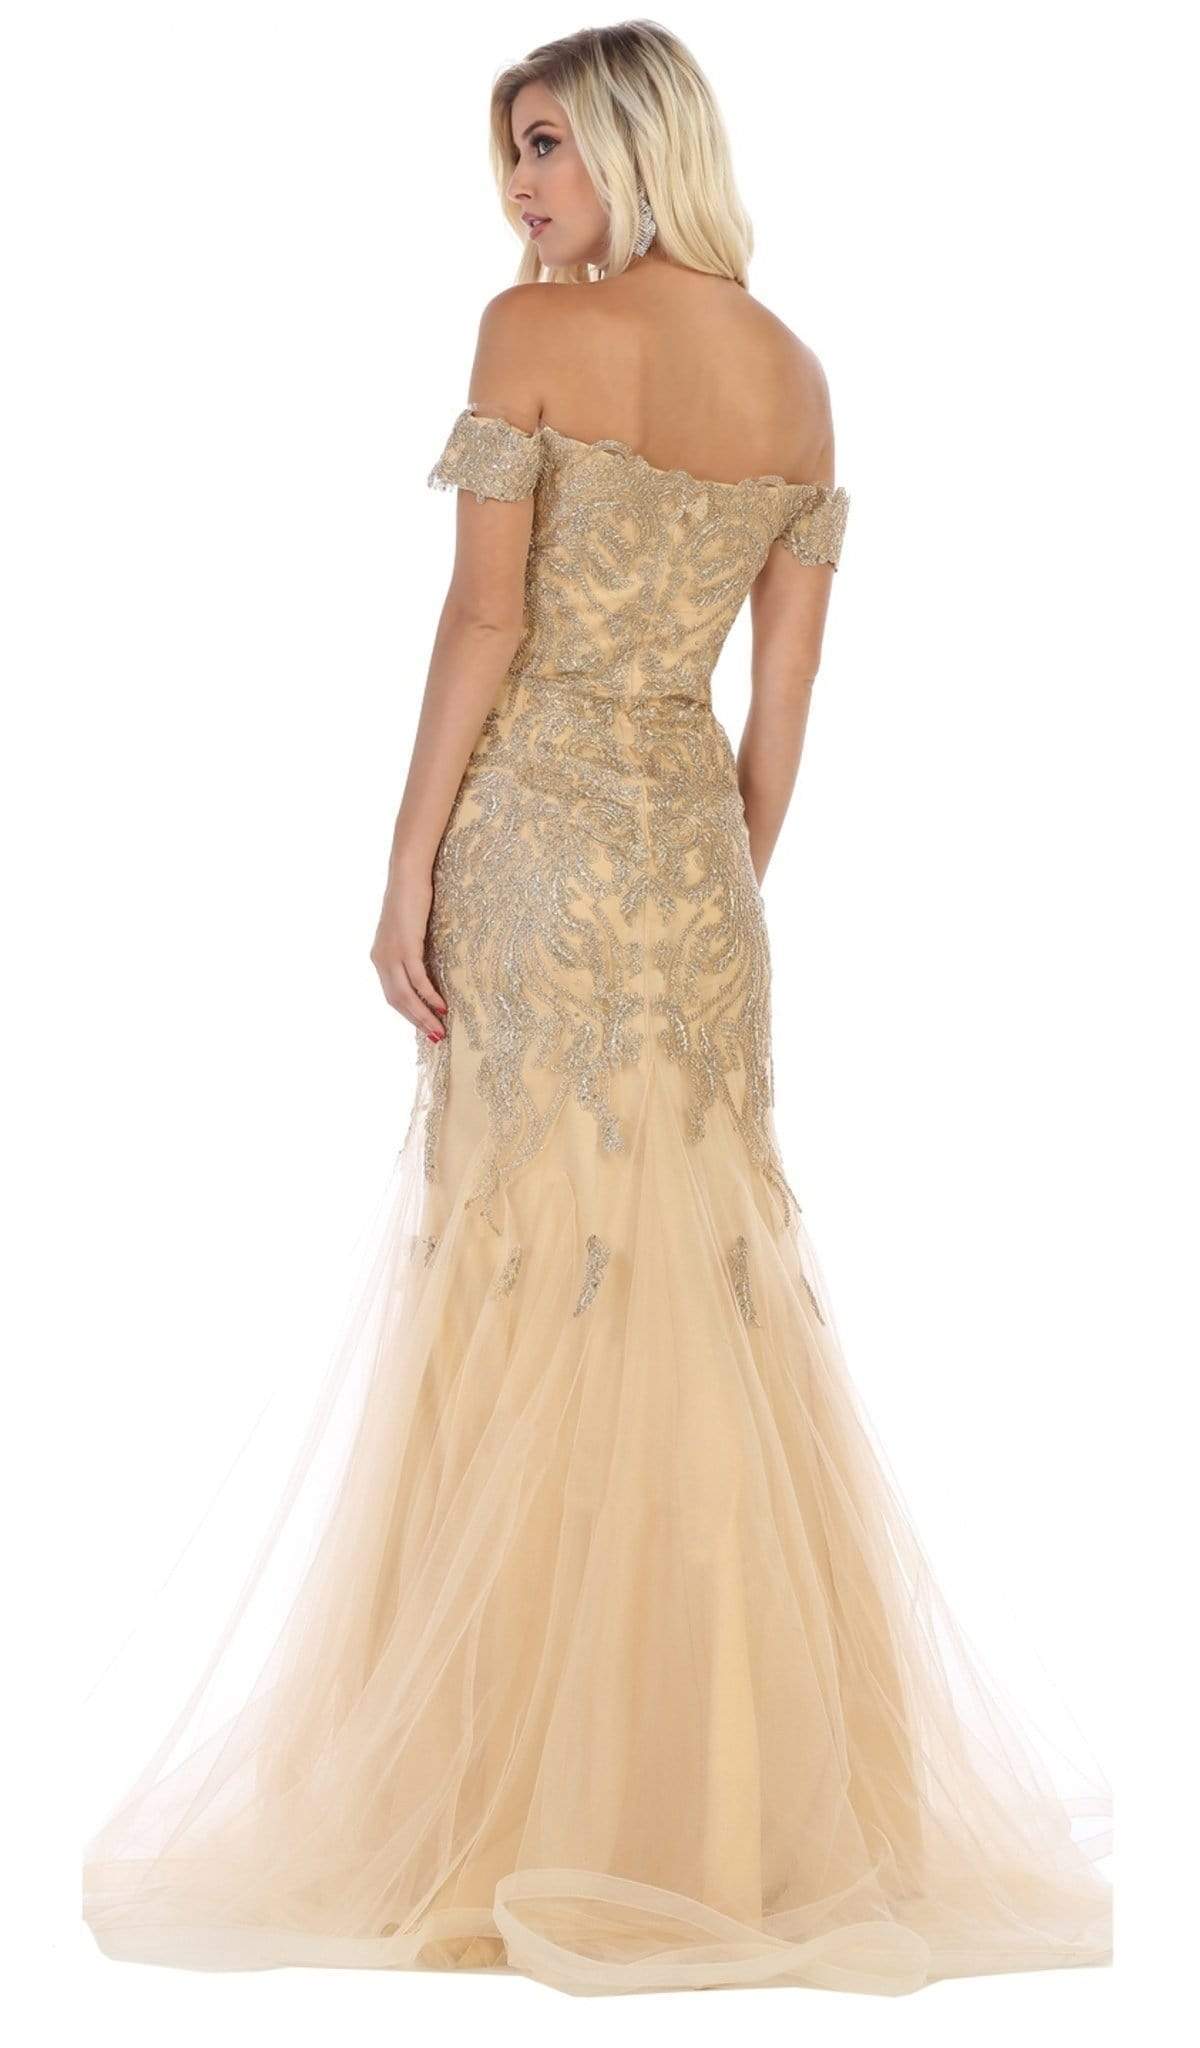 May Queen - Trailing Foliage Off Shoulder Trumpet Gown RQ7705 - 1 pc Gold In Size 8 Available CCSALE 8 / Gold